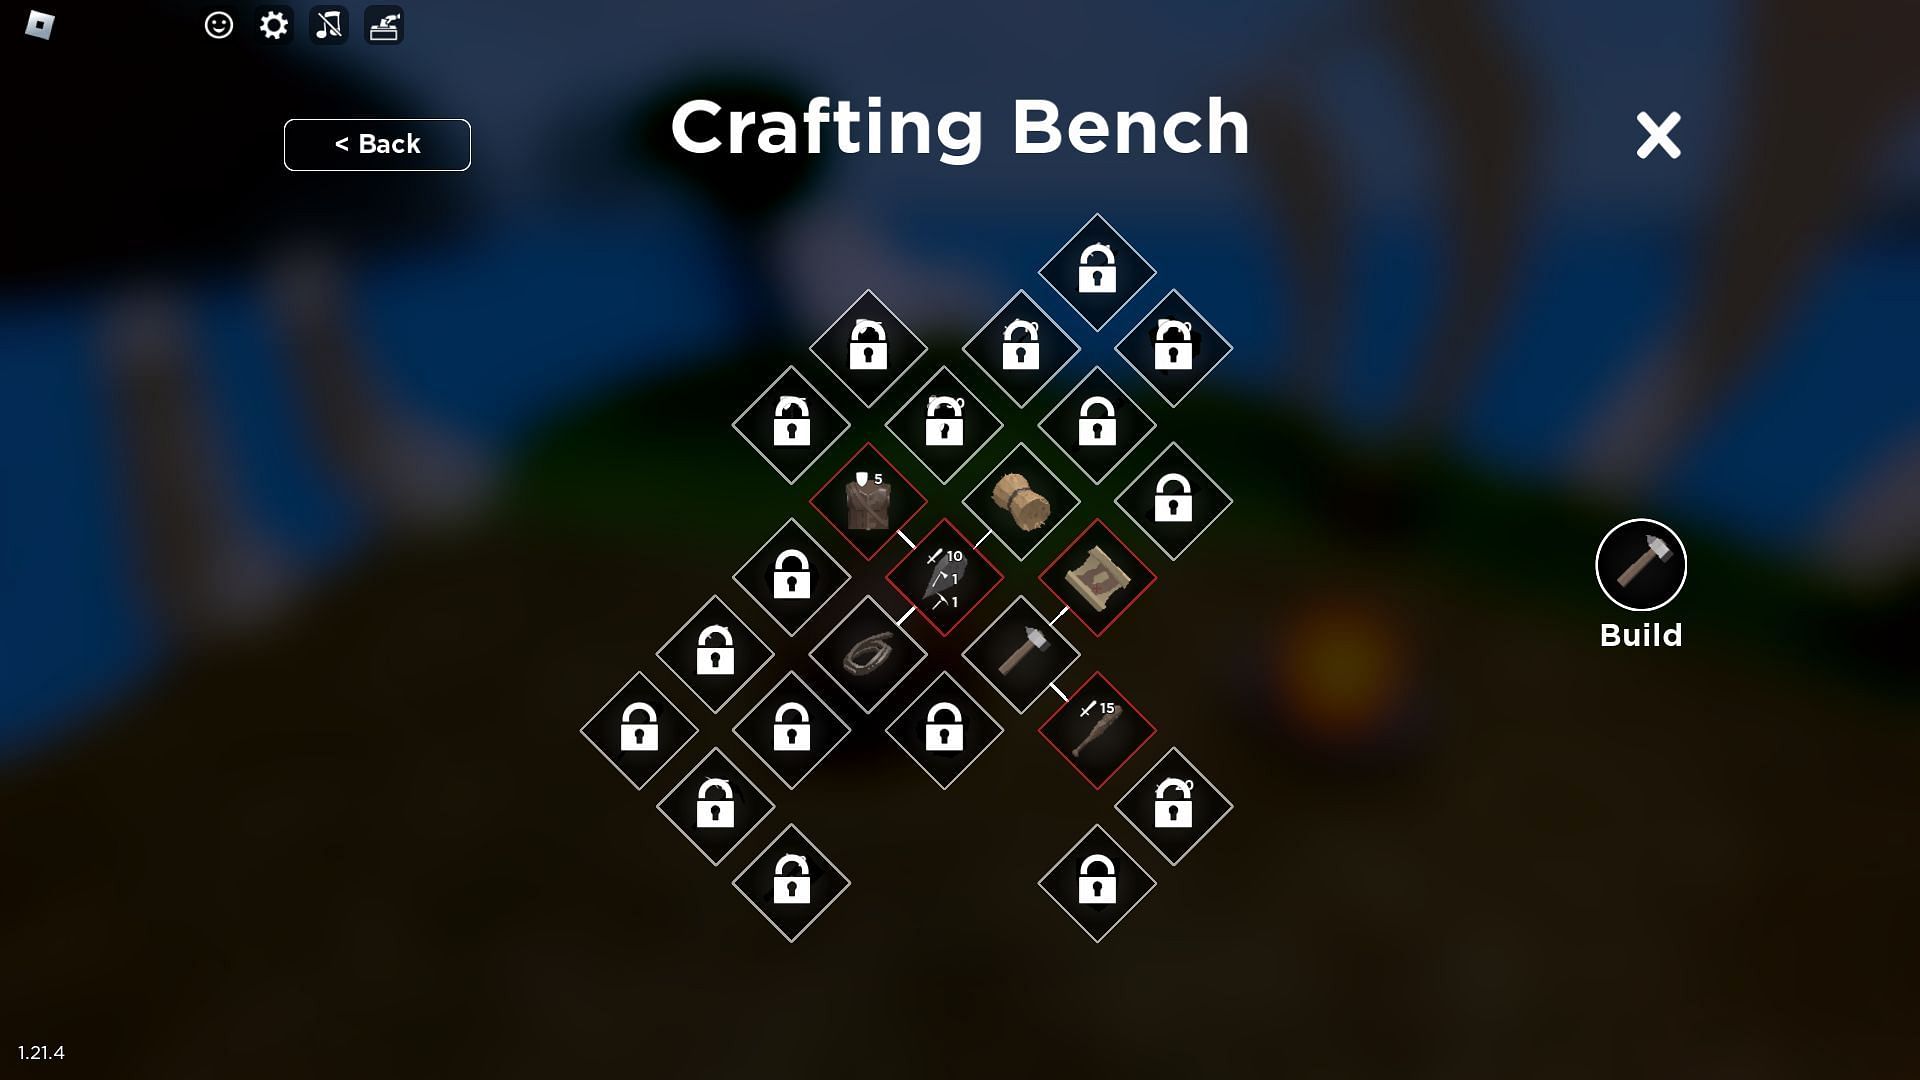 The Crafting Bench screen (Image via Roblox)